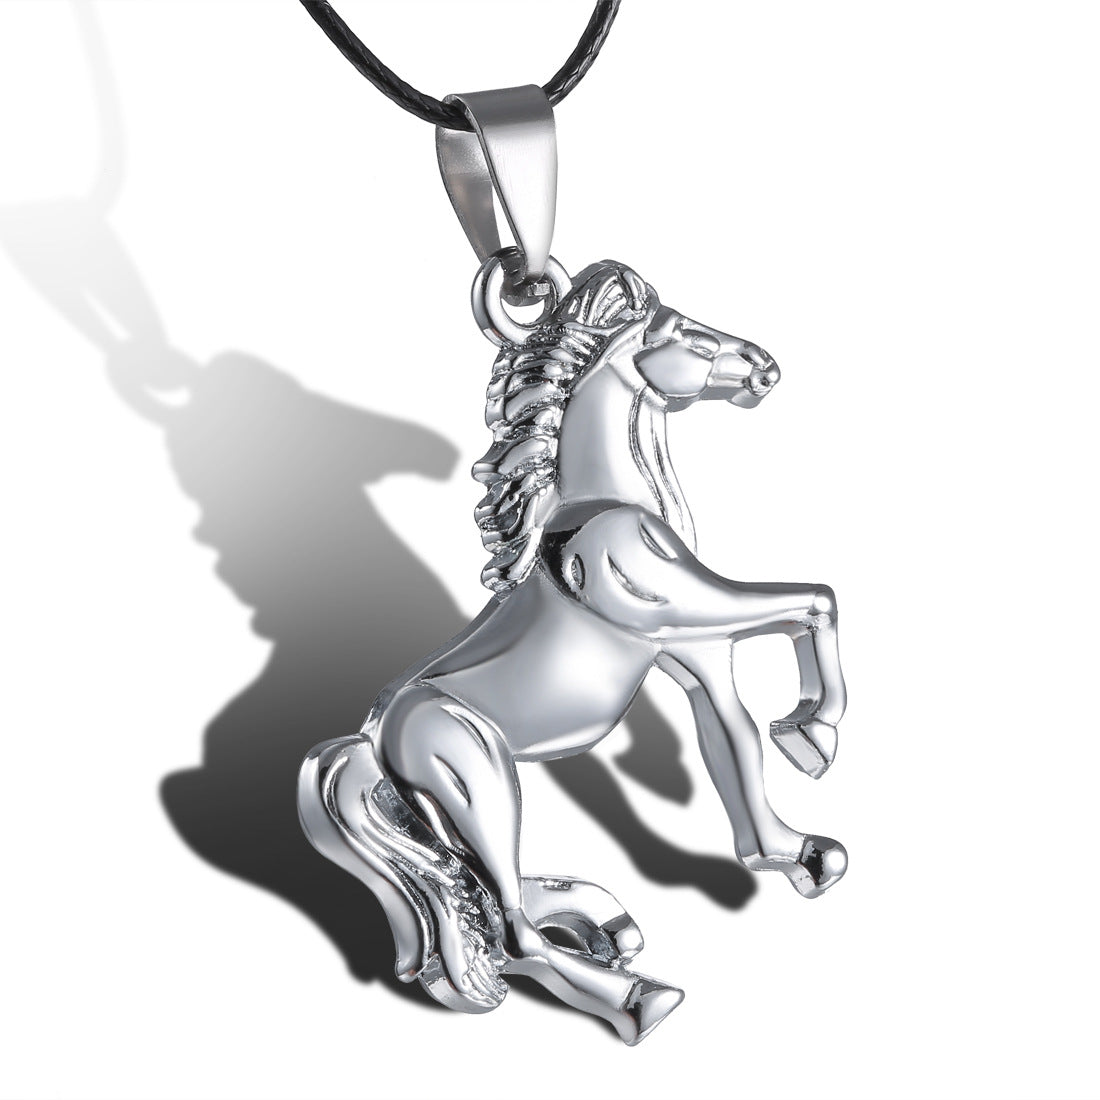 Horse Charm: New Fashion Animal Jewelry for Men and Women.